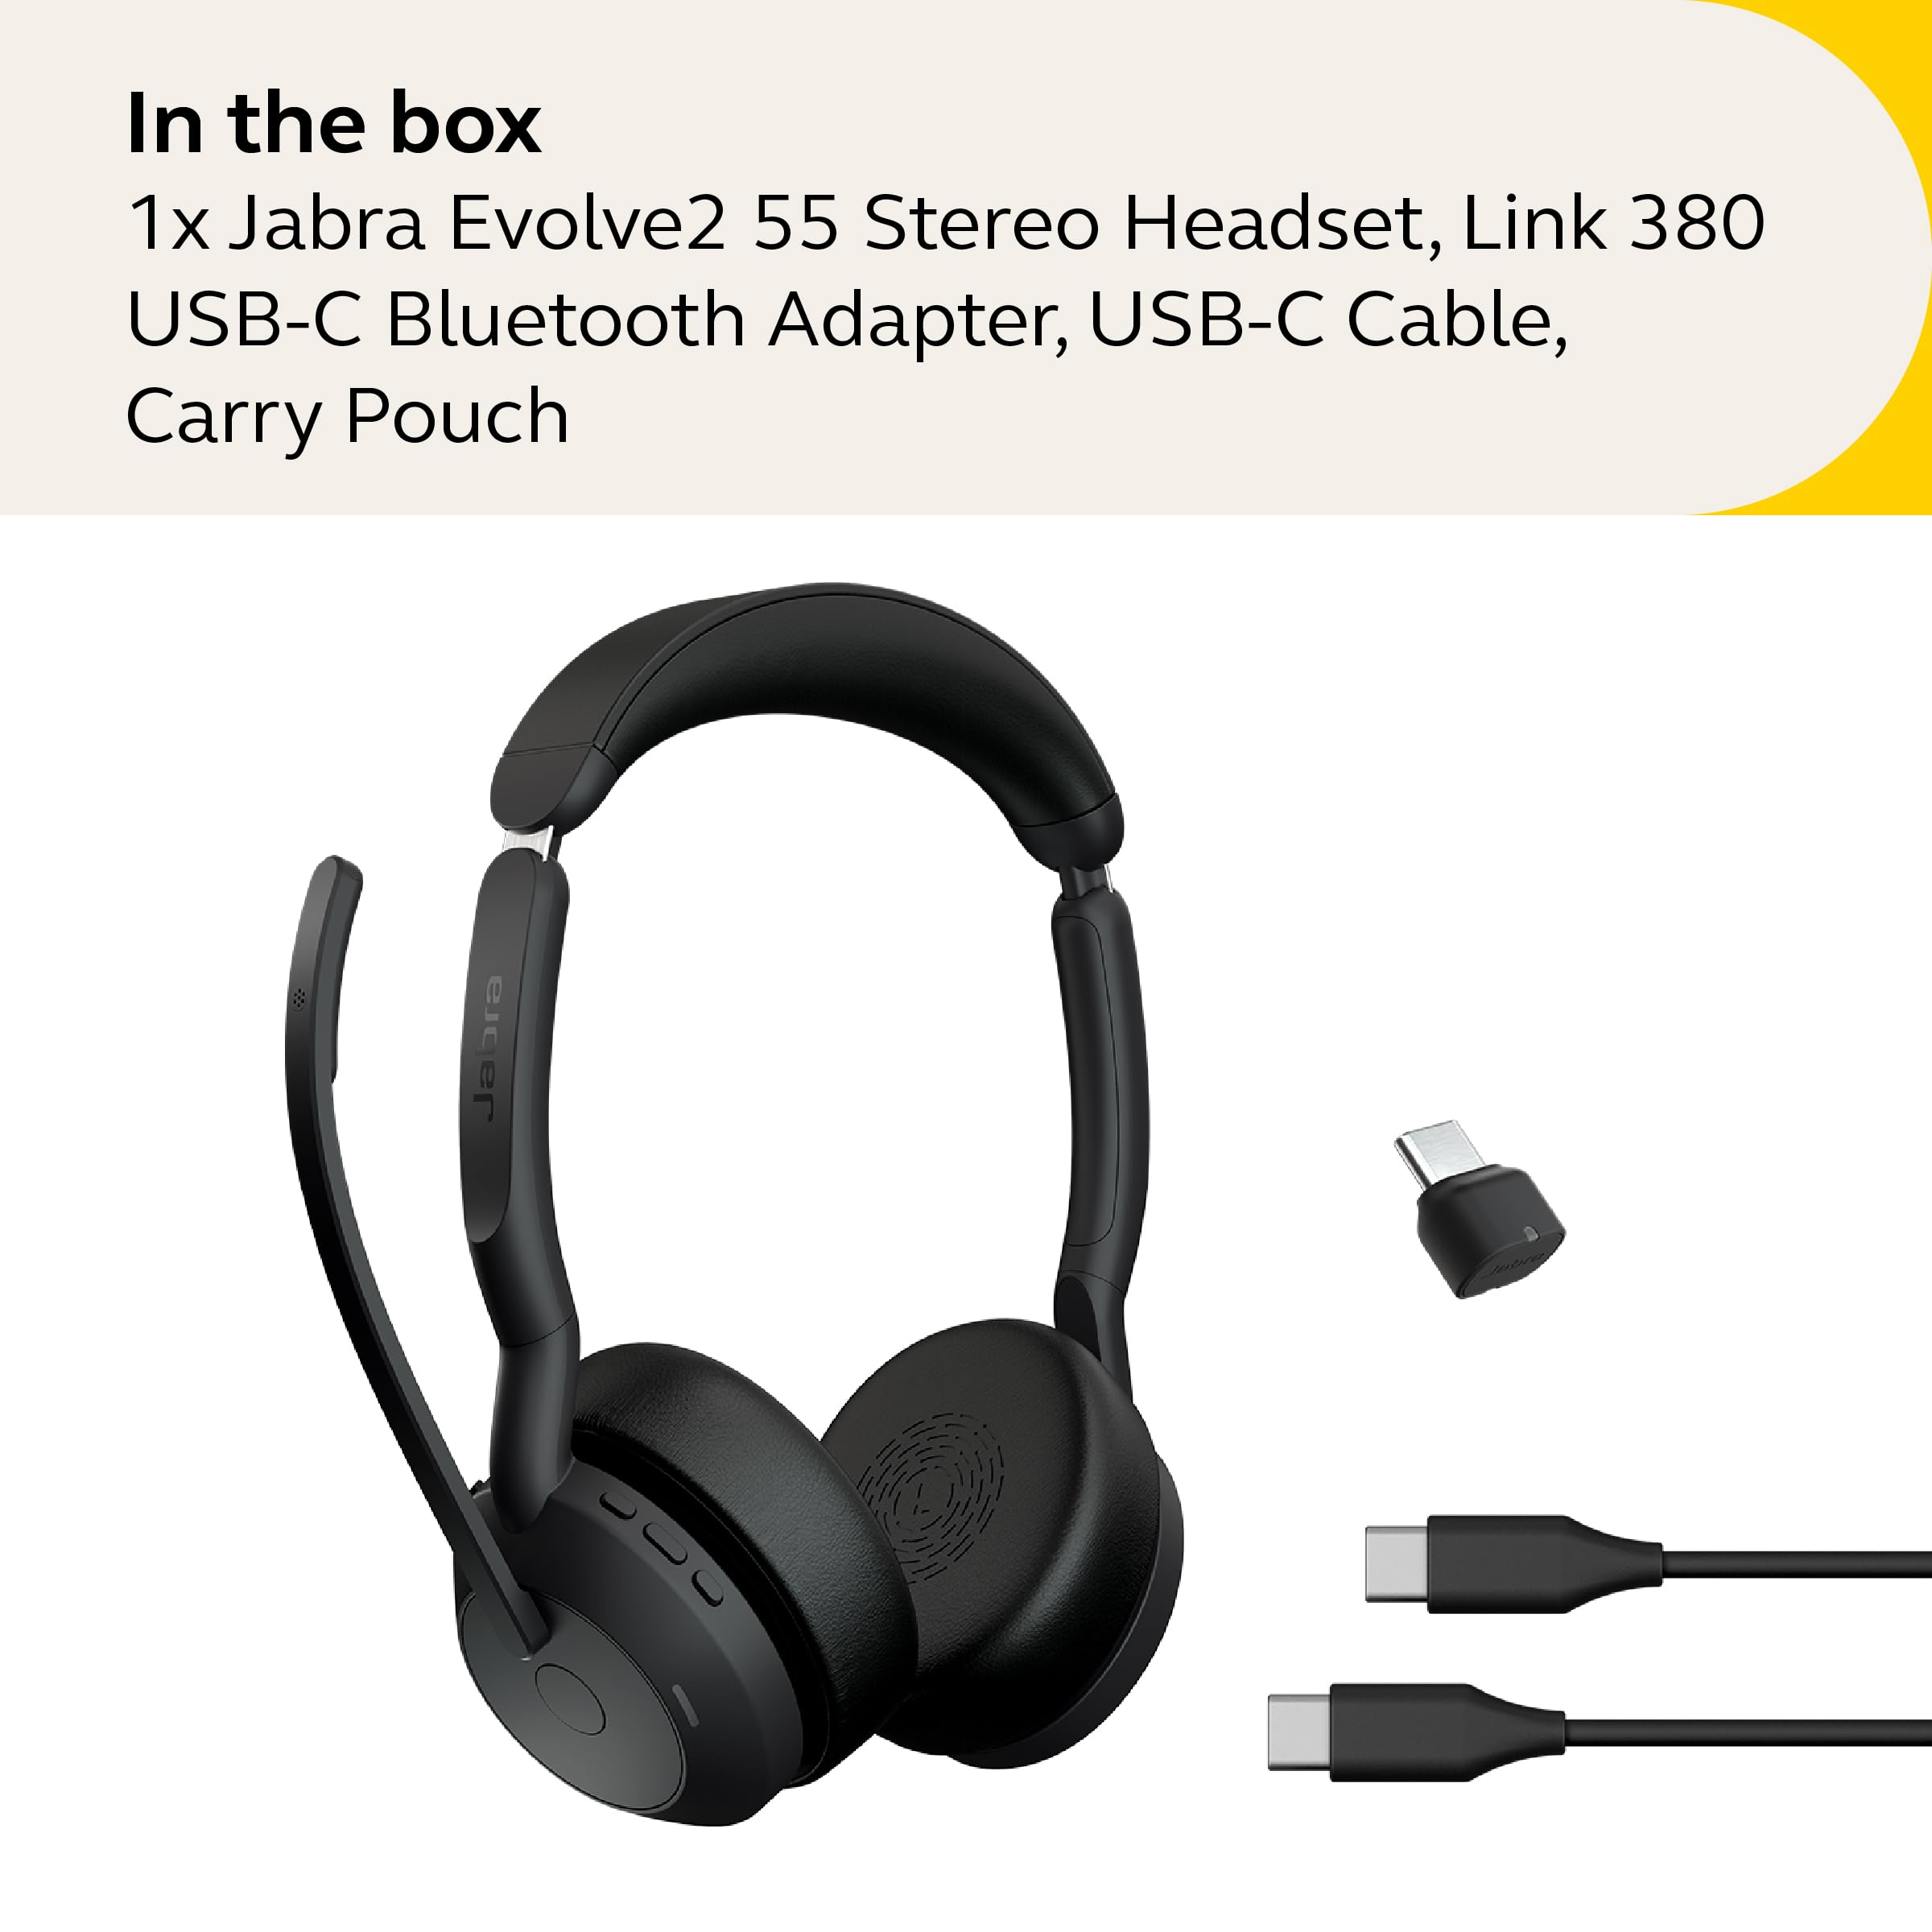 Jabra Evolve2 55 Stereo Wireless Headset - Features AirComfort Technology, Noise-Cancelling Mics & Active Noise Cancellation - Works with UC Platforms Such as Zoom & Google Meet - Black